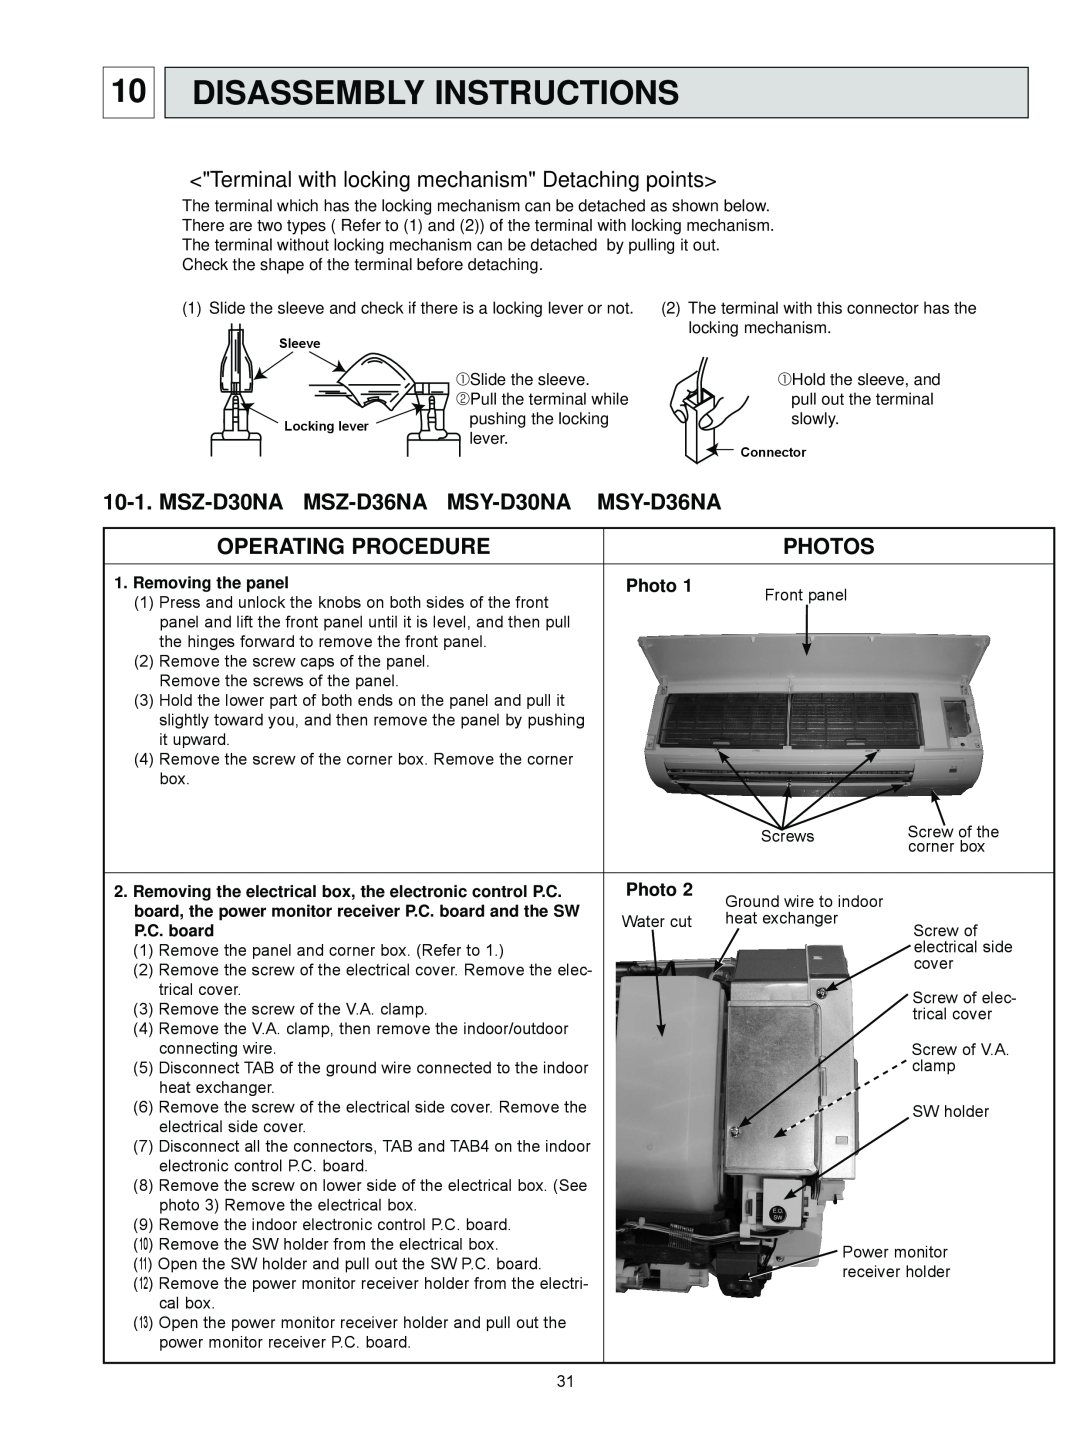 Vermont Casting Disassembly Instructions, MSZ-D30NA MSZ-D36NA MSY-D30NA, Operating Procedure, Photos, MSY-D36NA 